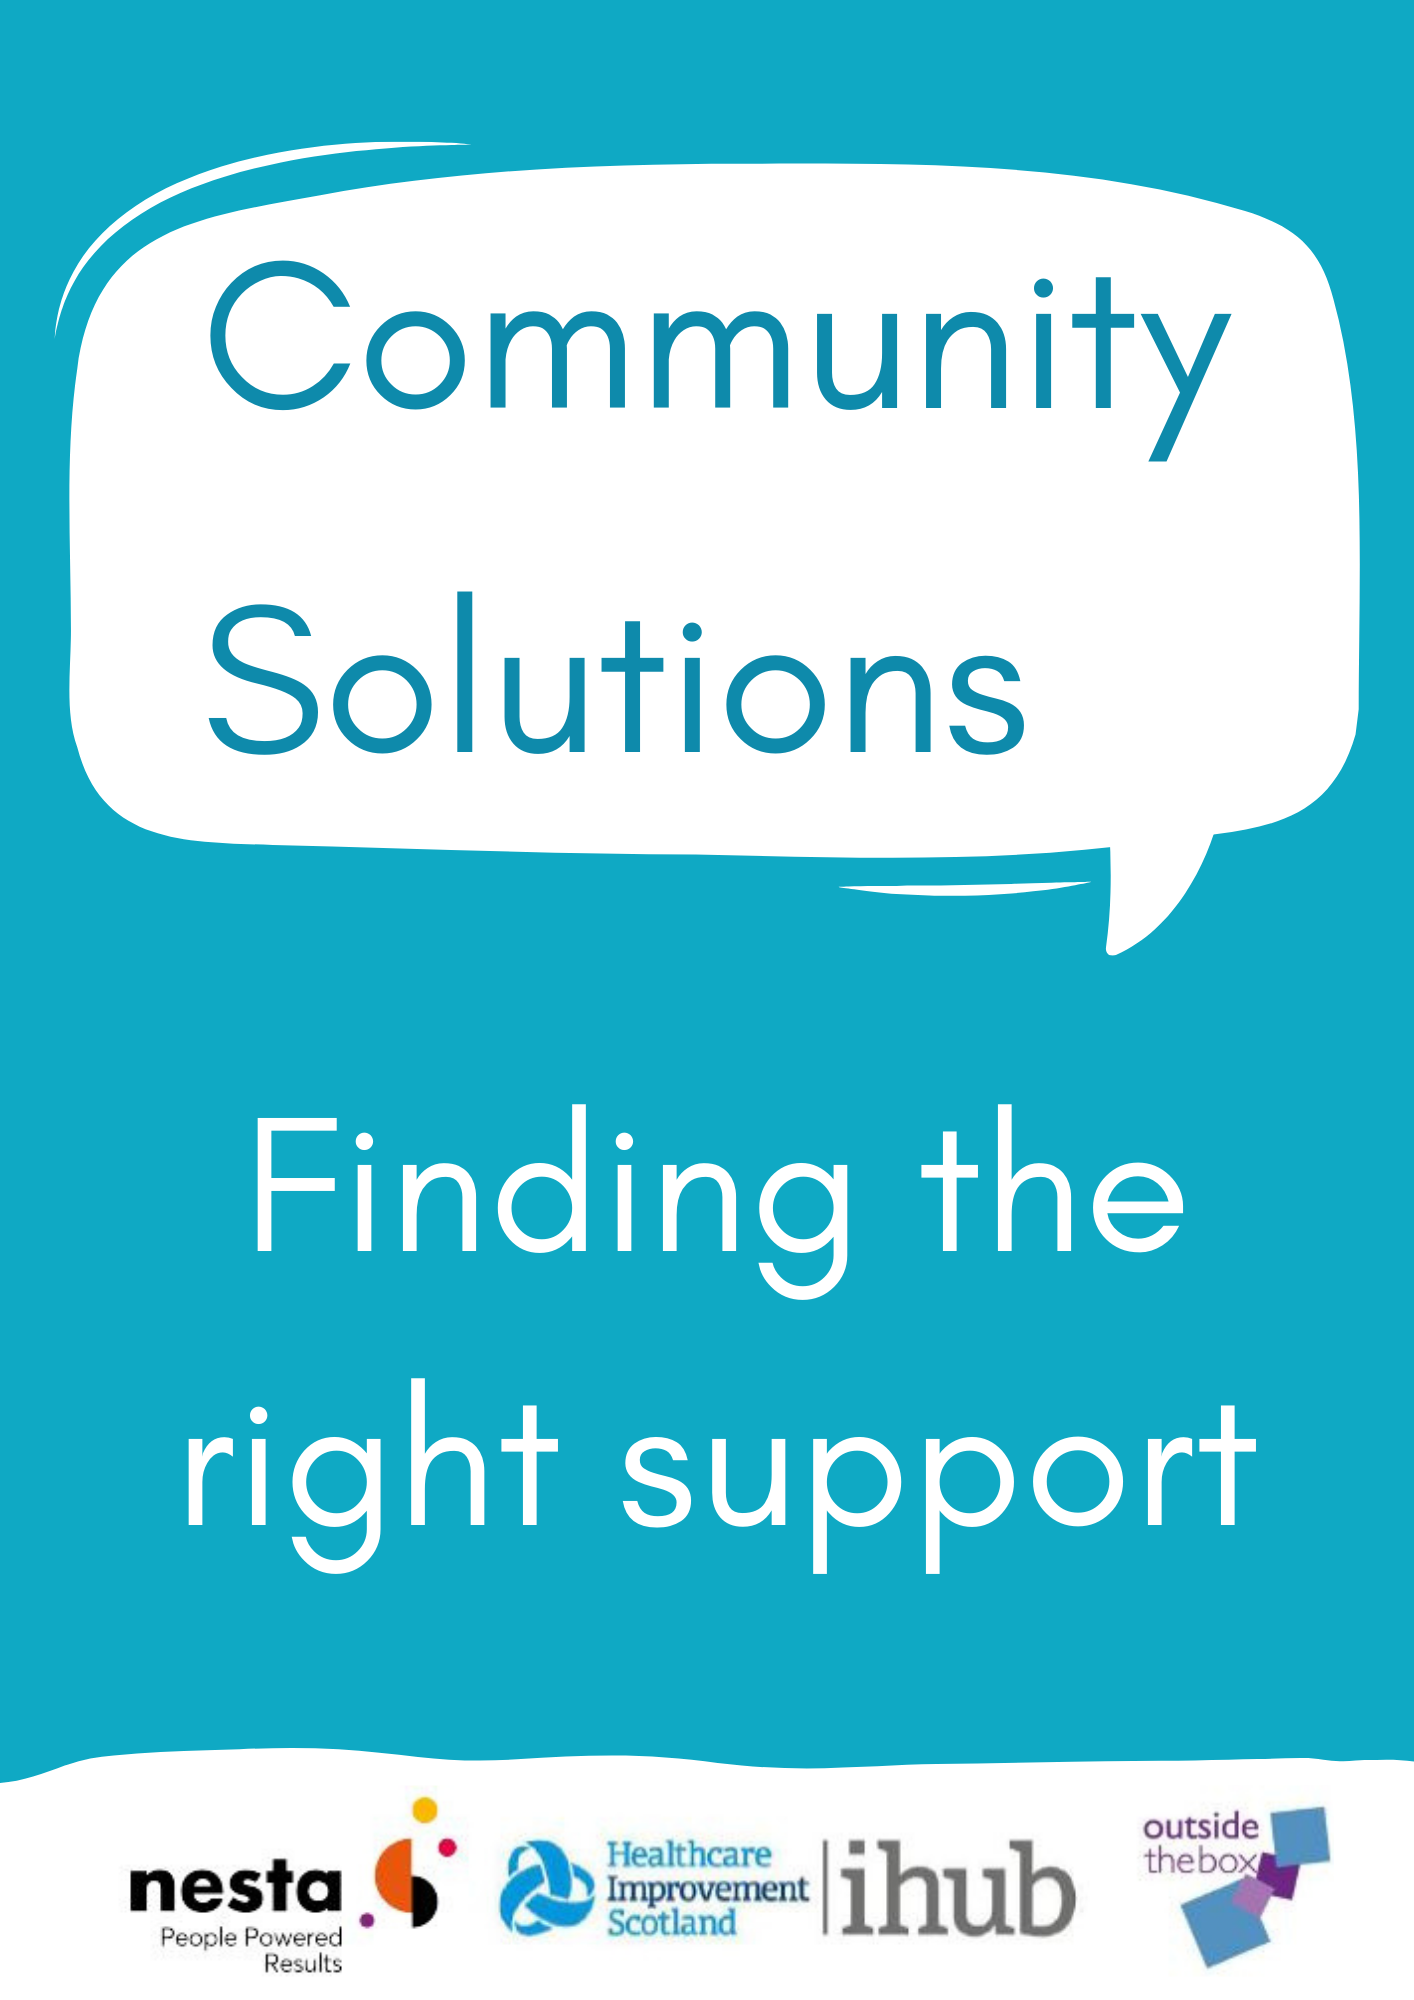 Community Solutions. Finding the right support